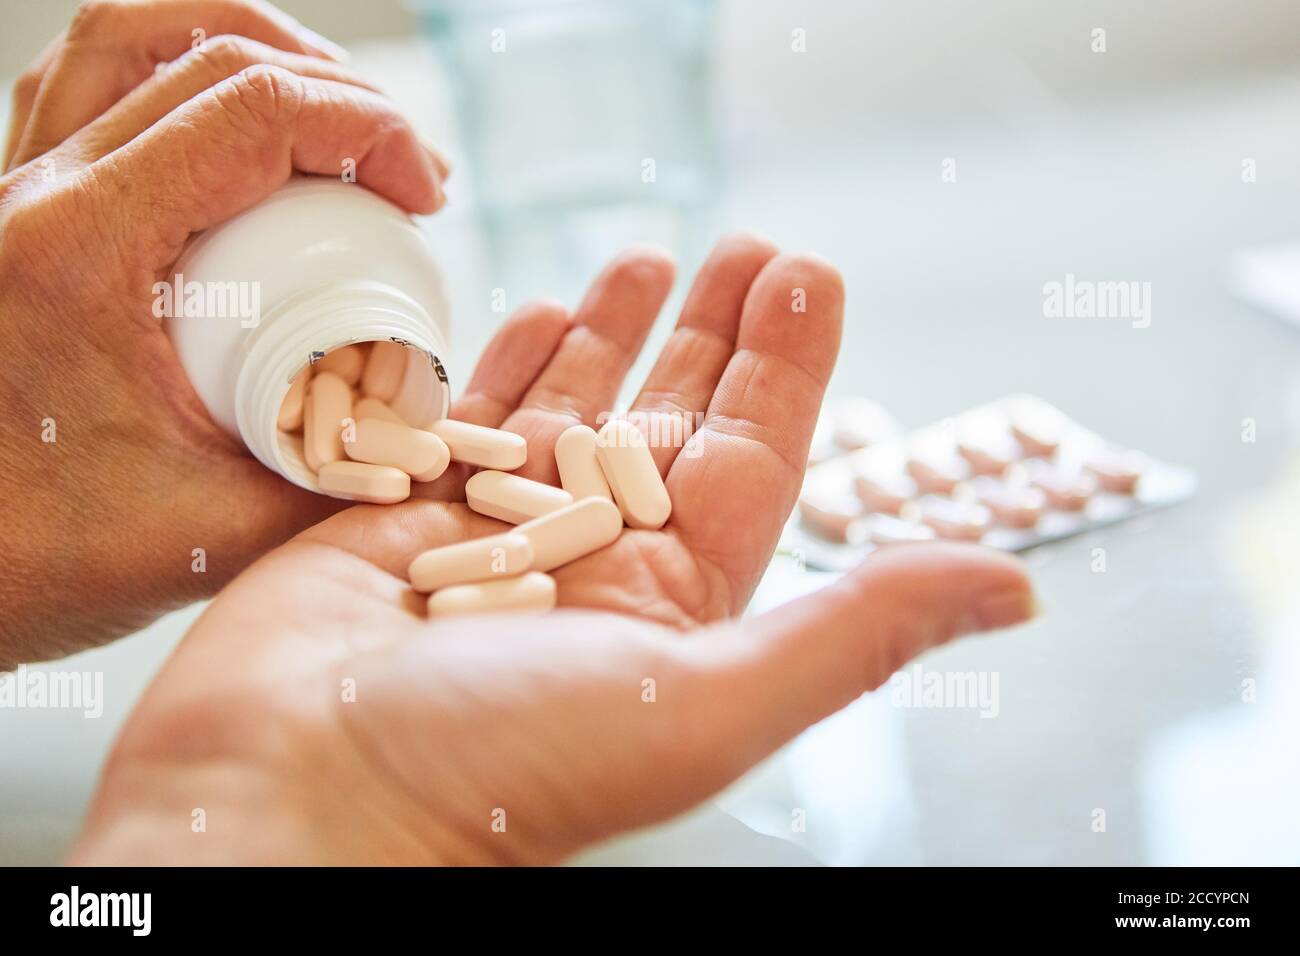 Patient pours many pills on his hand as a sign of drug addiction Stock Photo